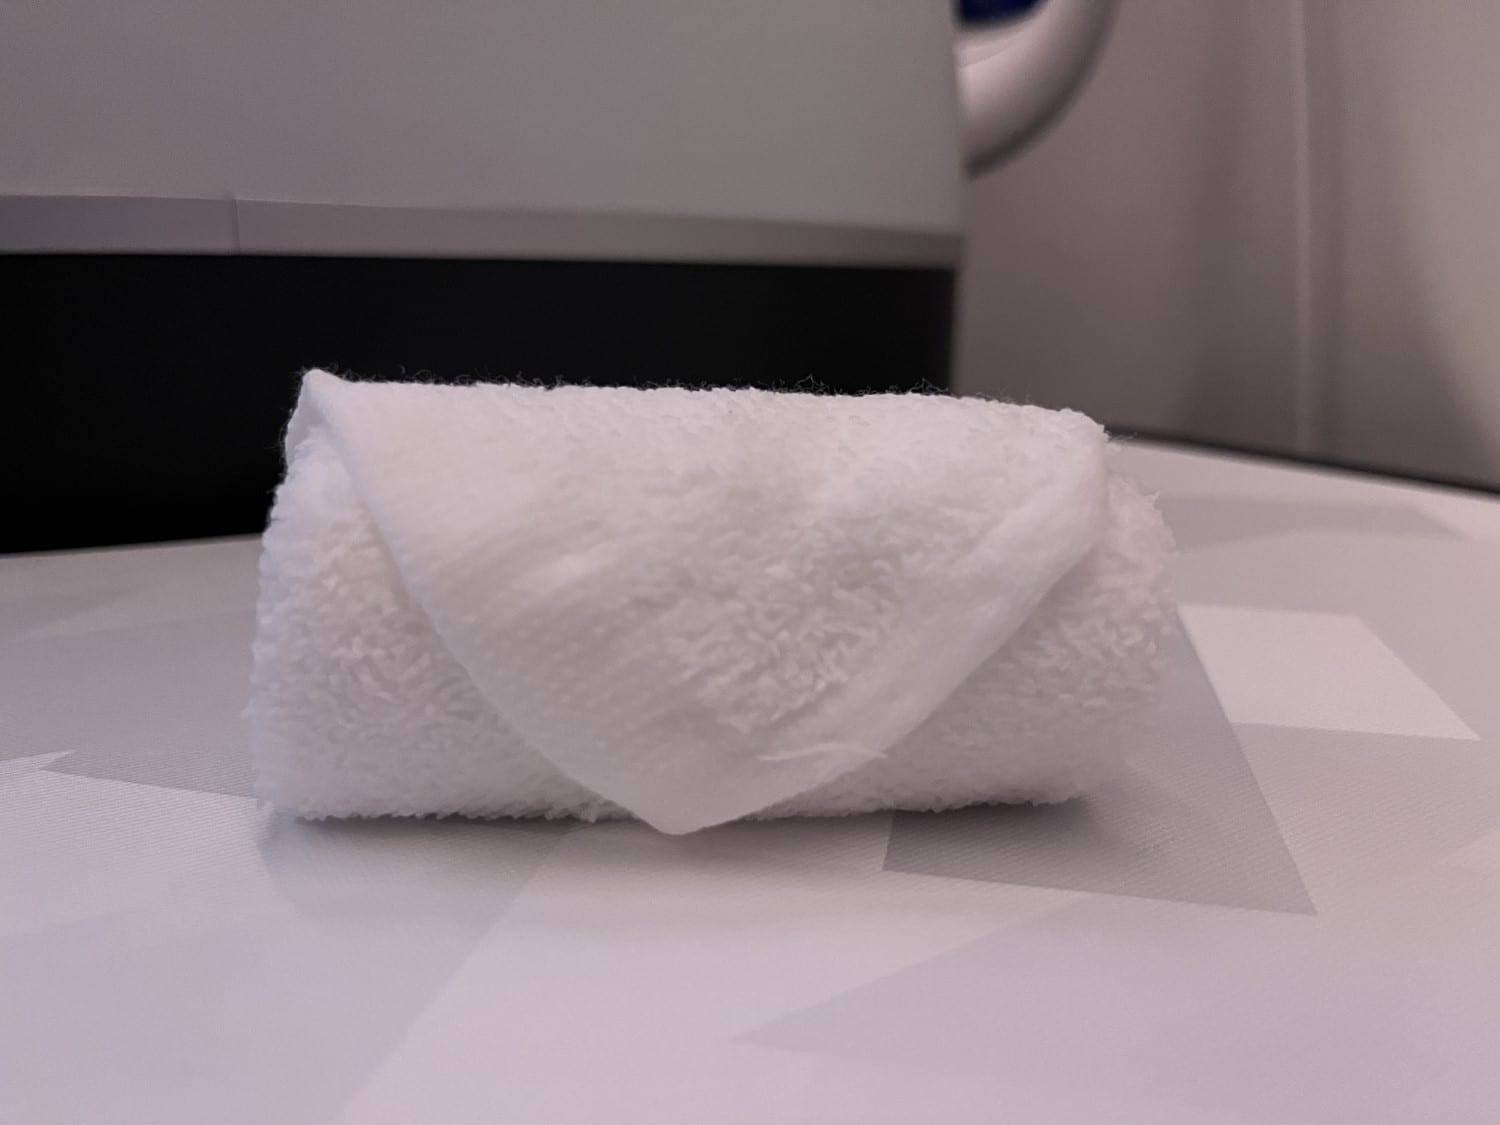 delta one business class hot towel service